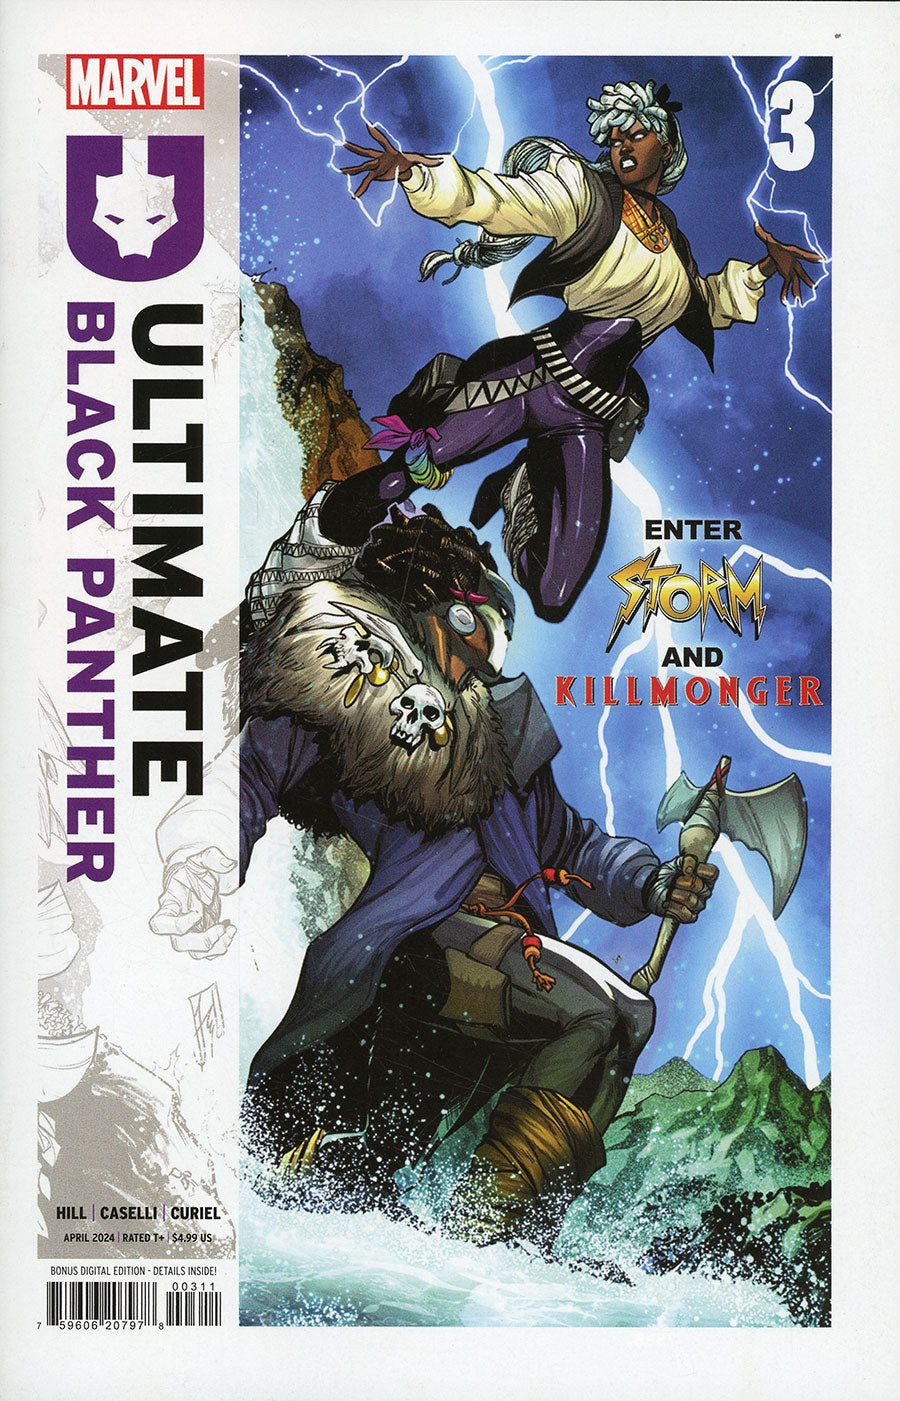 Ultimate Black Panther #3